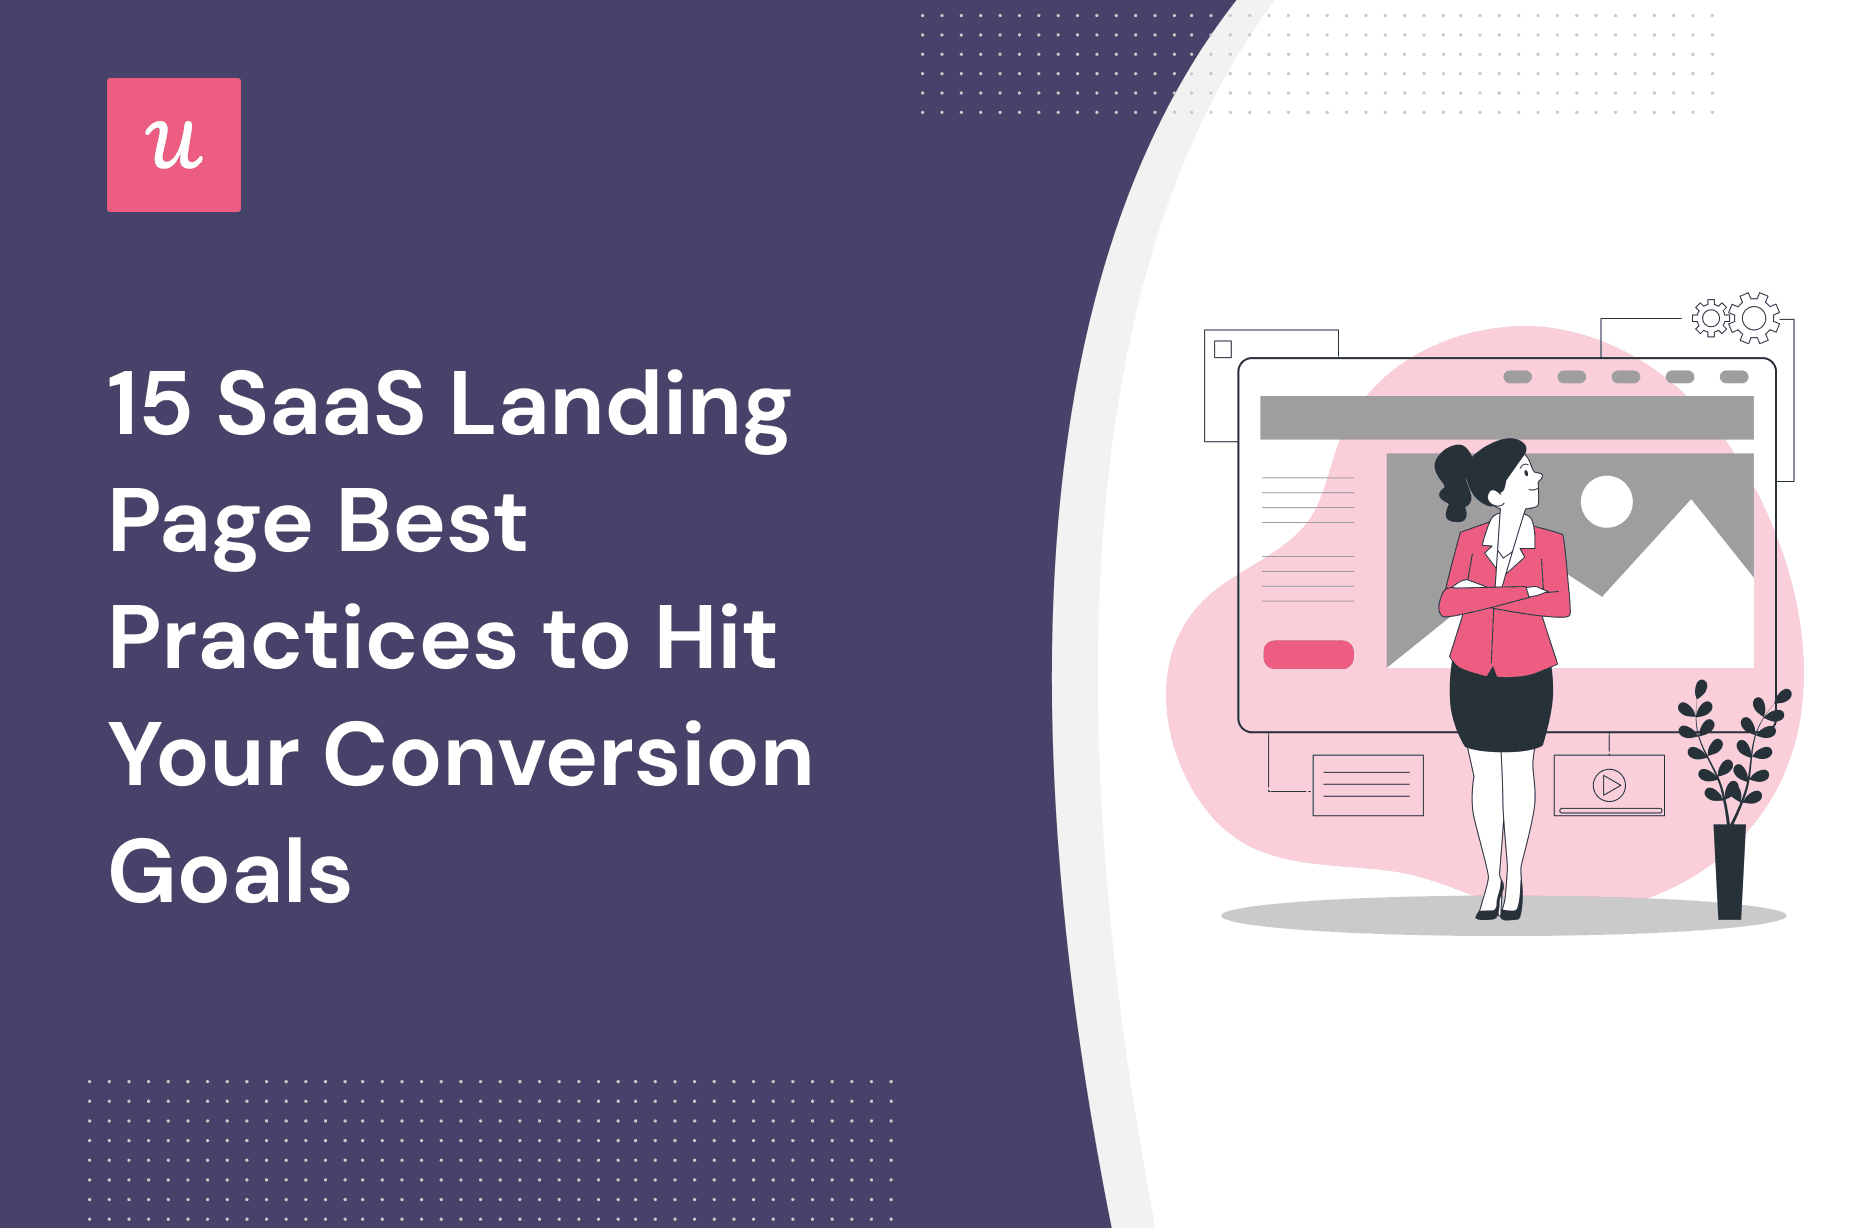 15 SaaS Landing Page Best Practices to Hit Your Conversion Goals cover